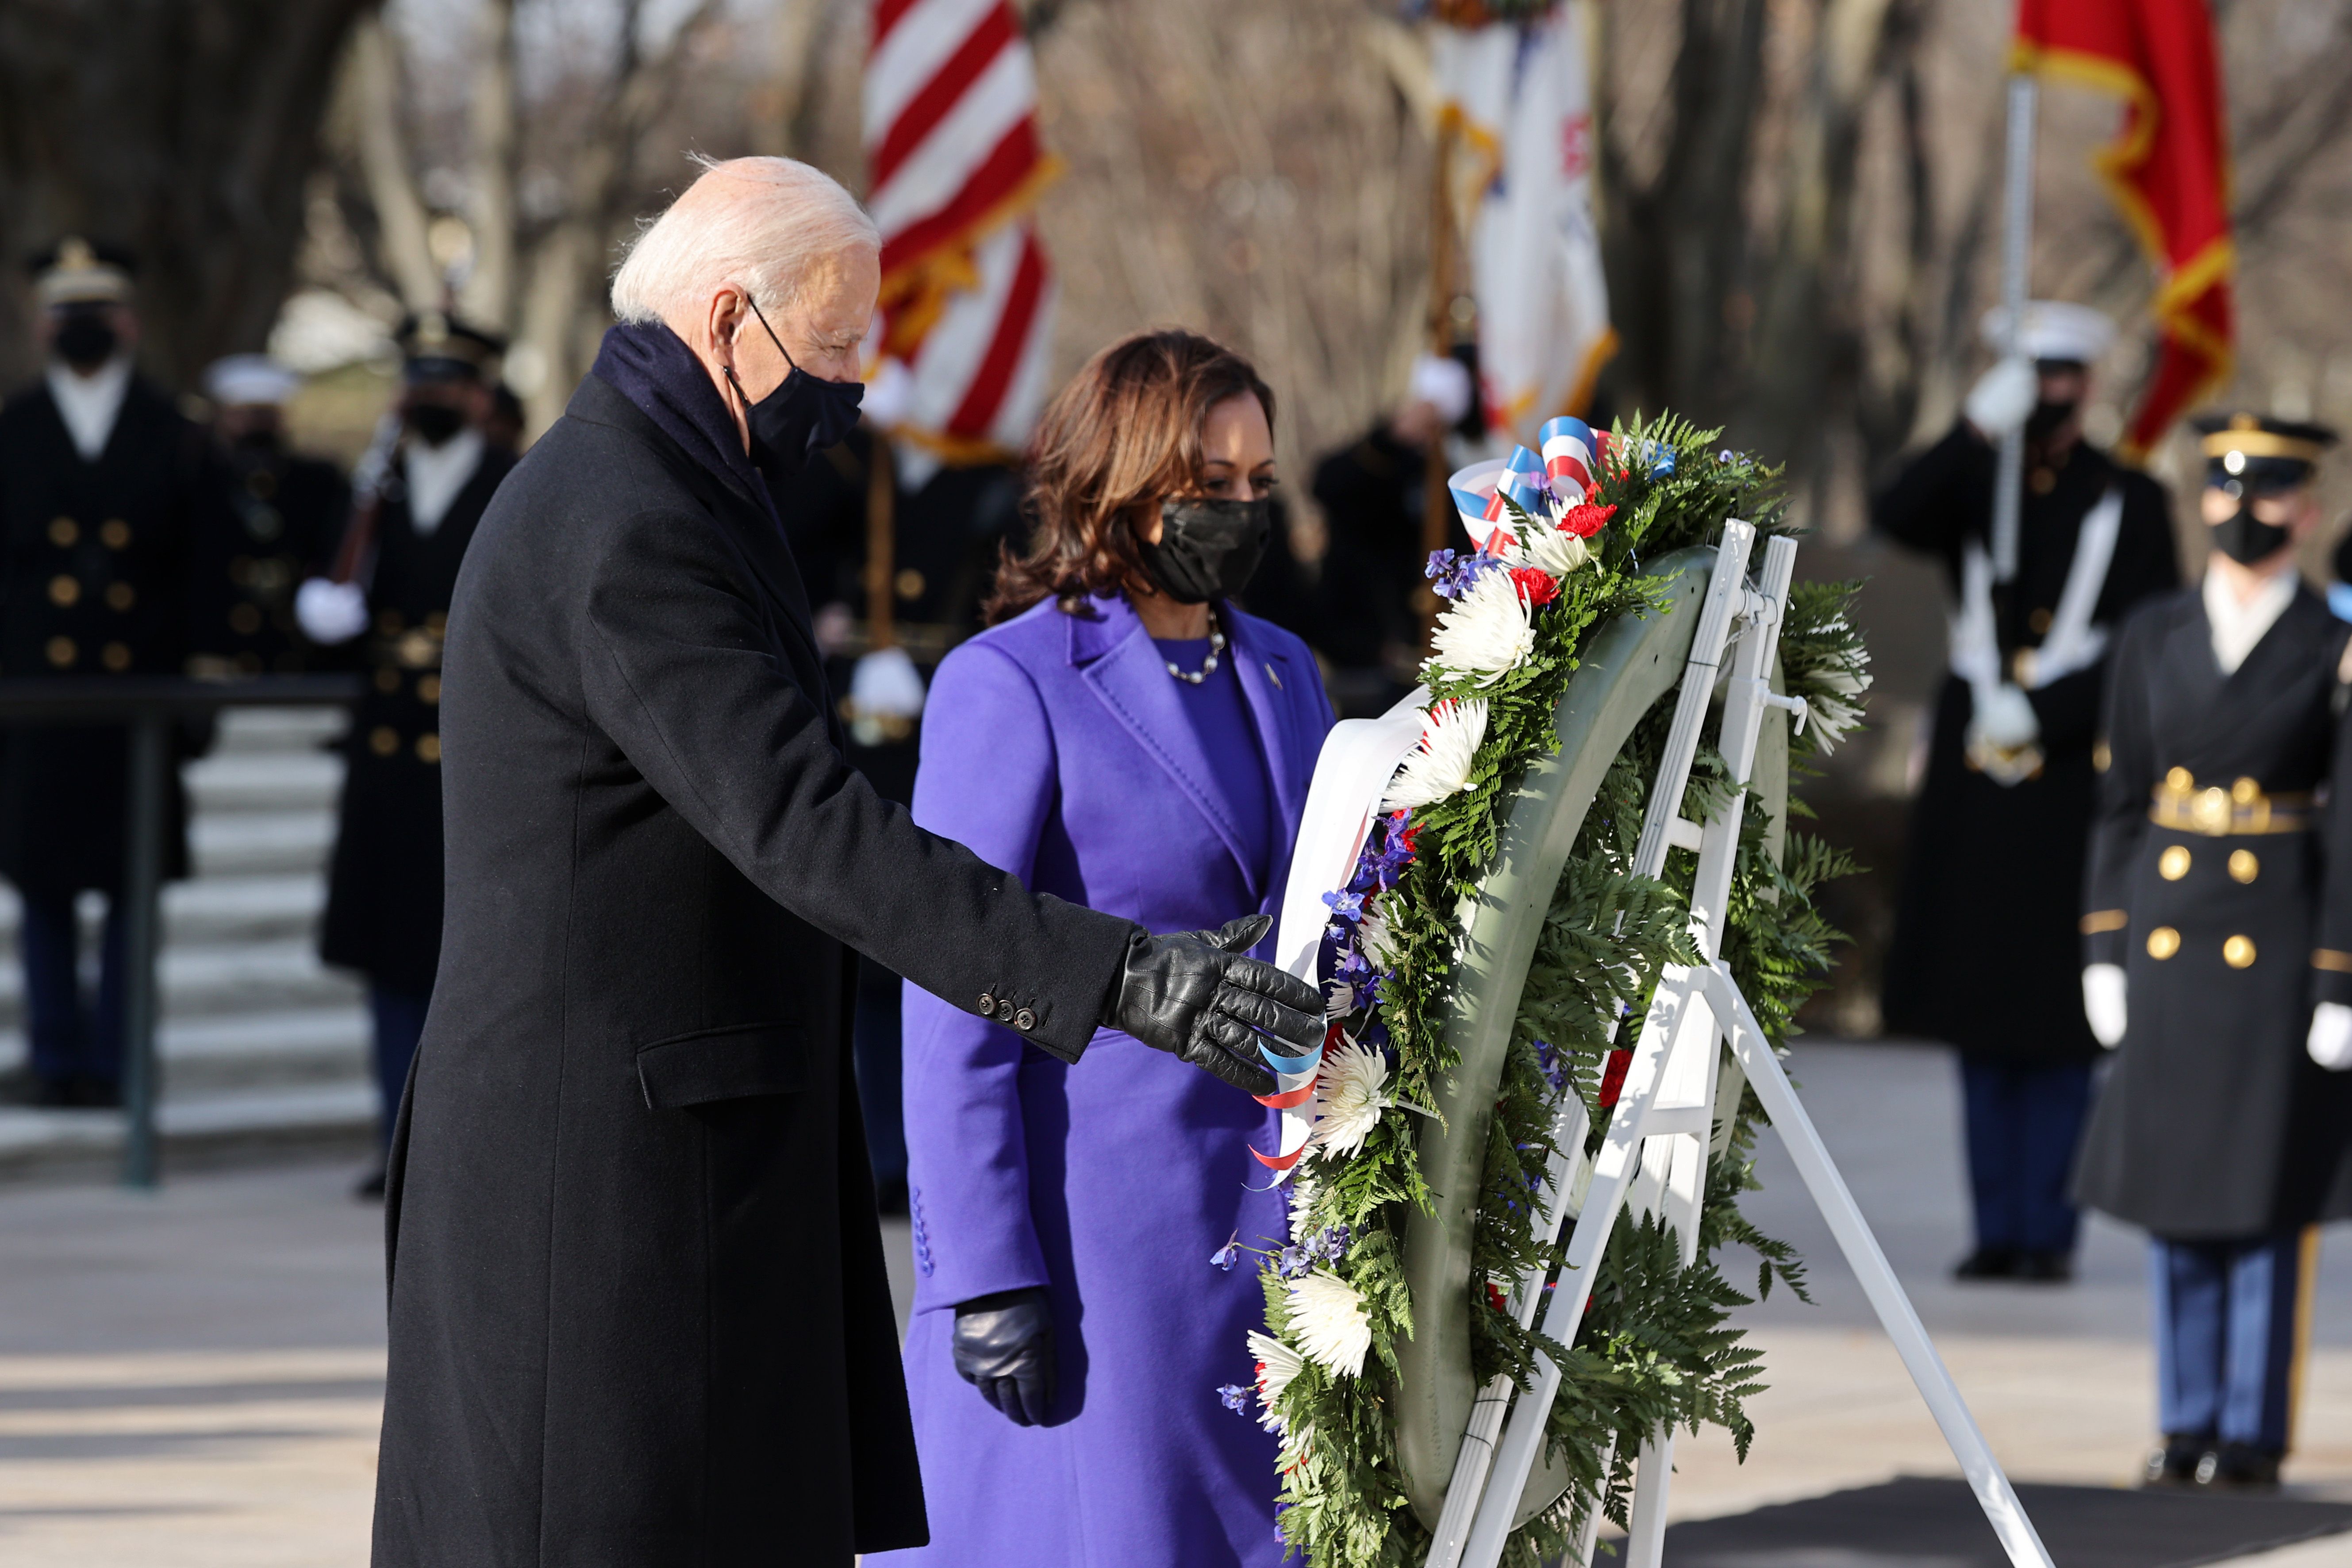 Biden and Harris pay their respects in front of a wreath at the Tomb of the Unknown Soldier.